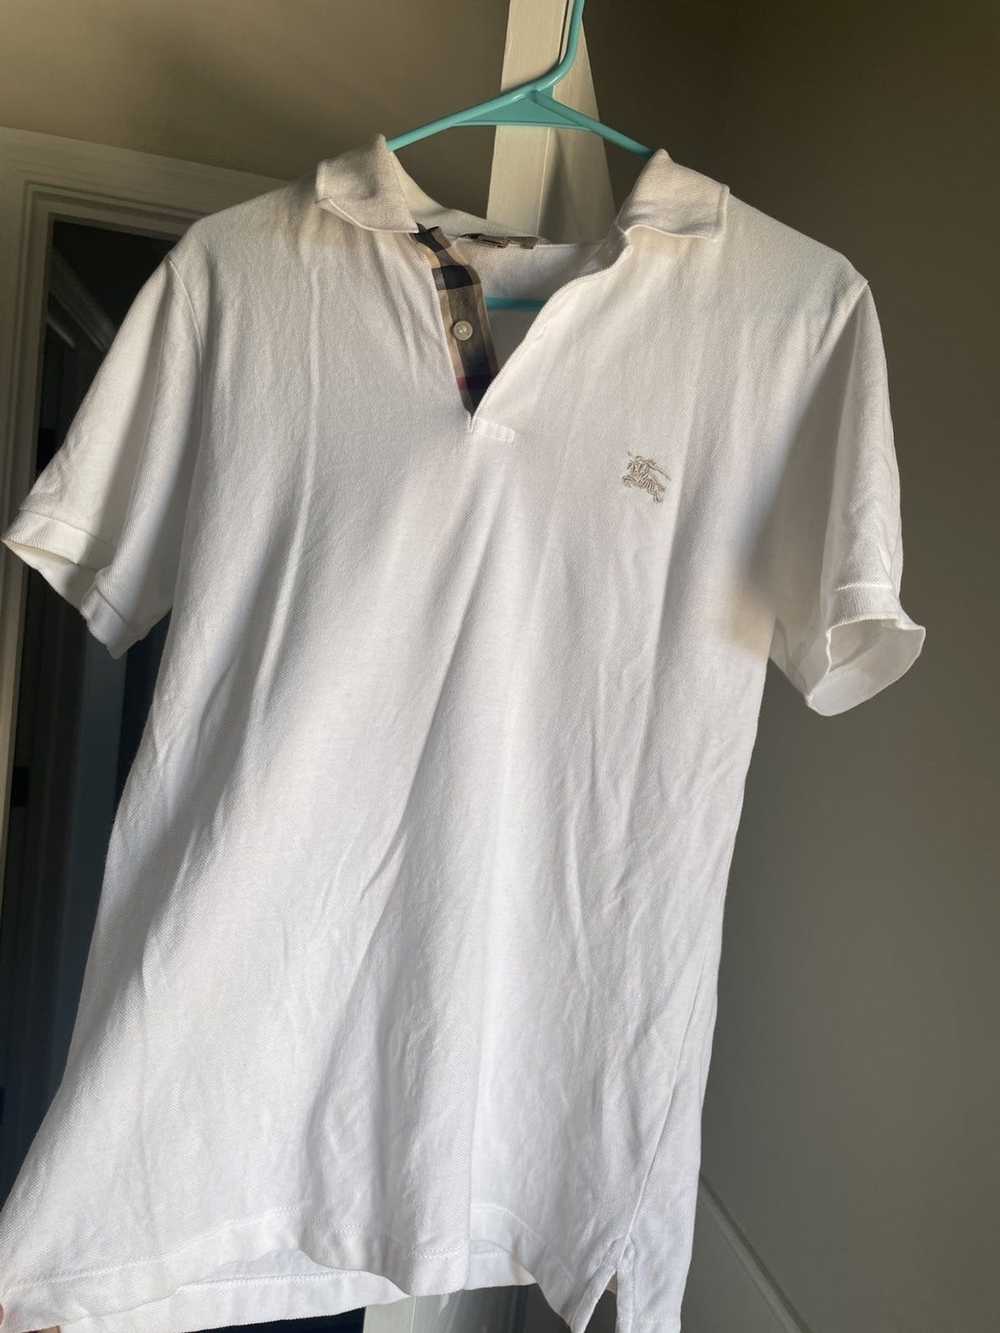 Burberry Gently Used Burberry Brit Polo - image 1